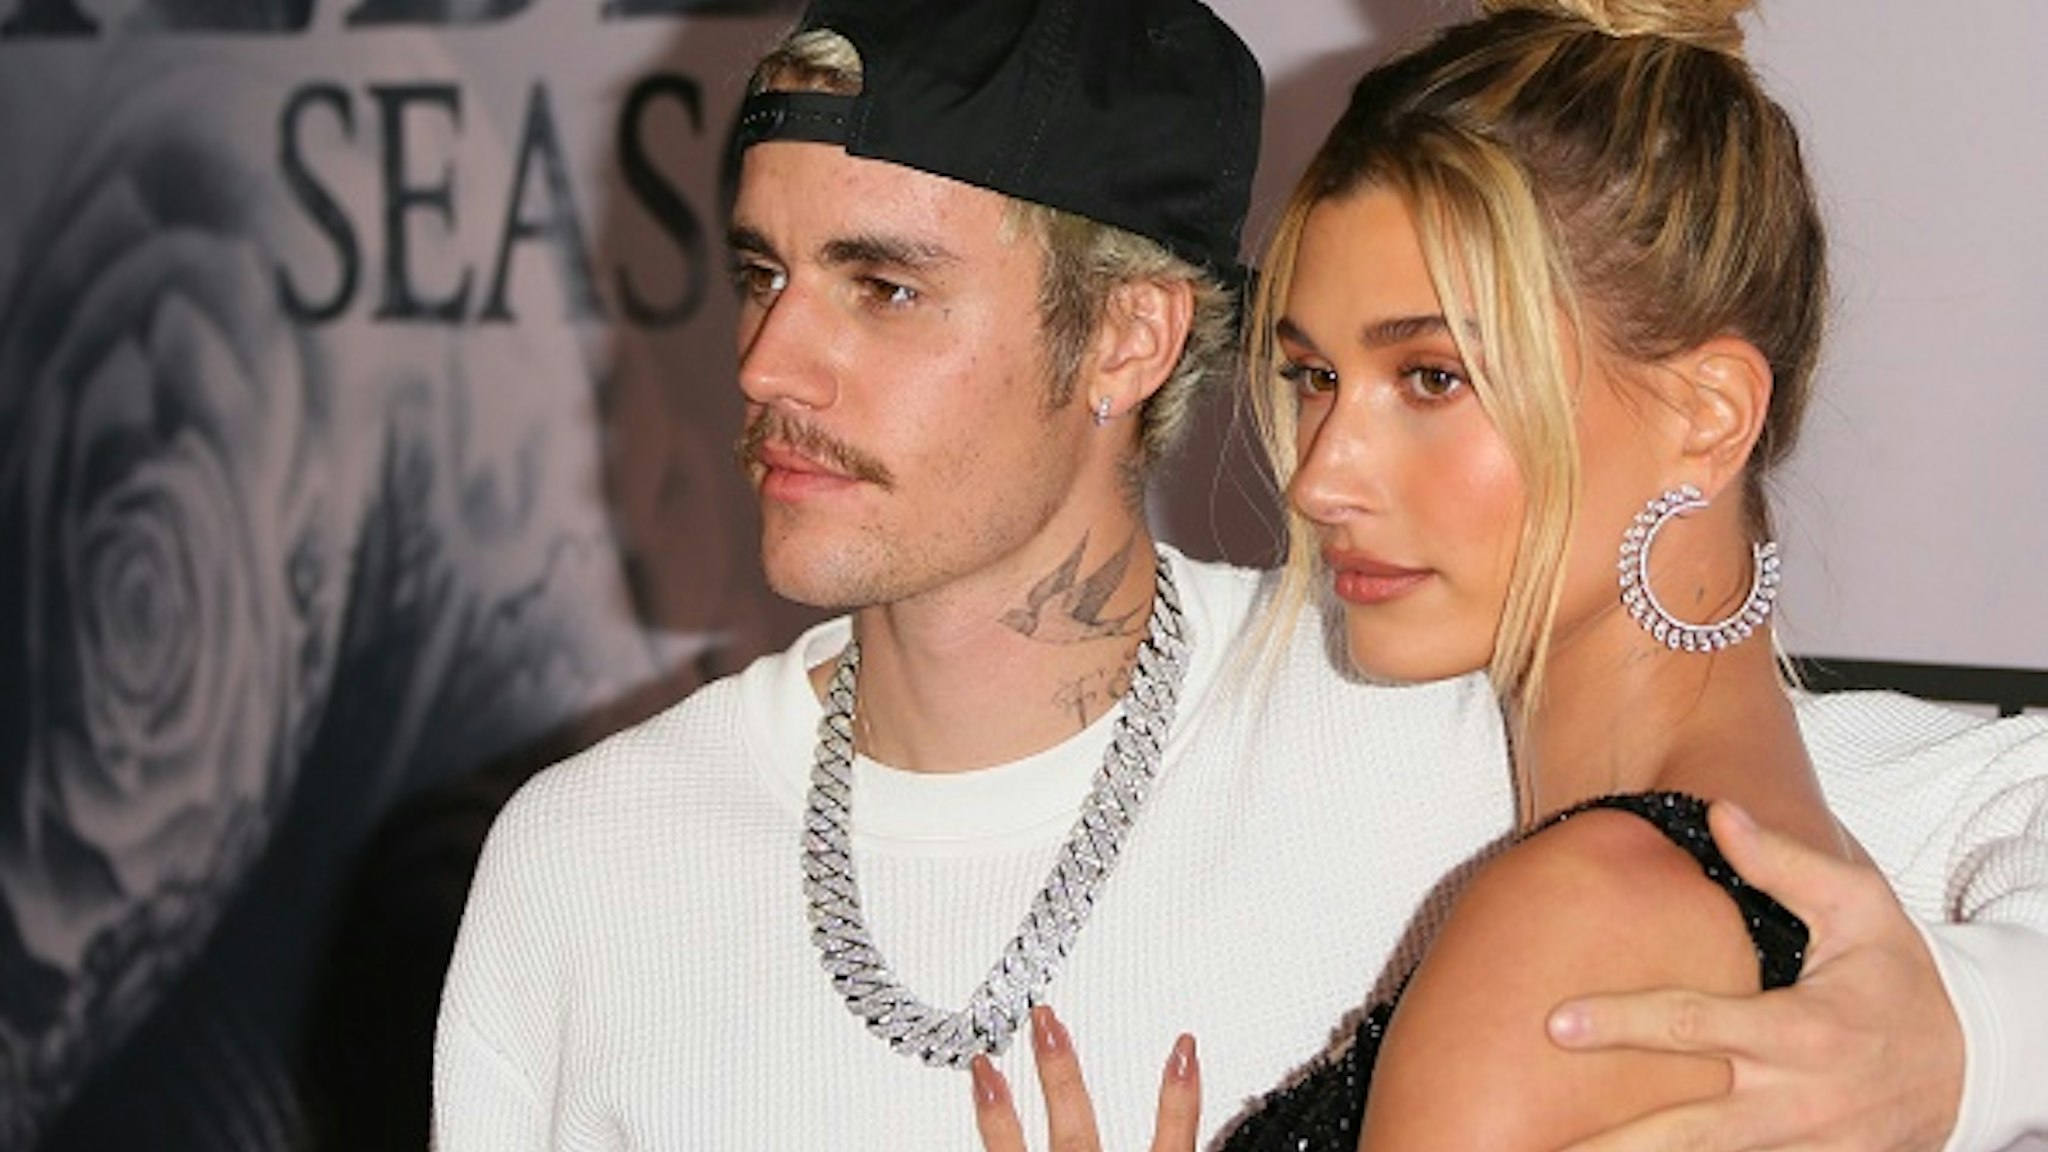 LOS ANGELES, CALIFORNIA - JANUARY 27: Justin Bieber and Hailey Bieber attend the premiere of YouTube Originals' "Justin Bieber: Seasons" at Regency Bruin Theatre on January 27, 2020 in Los Angeles, California.